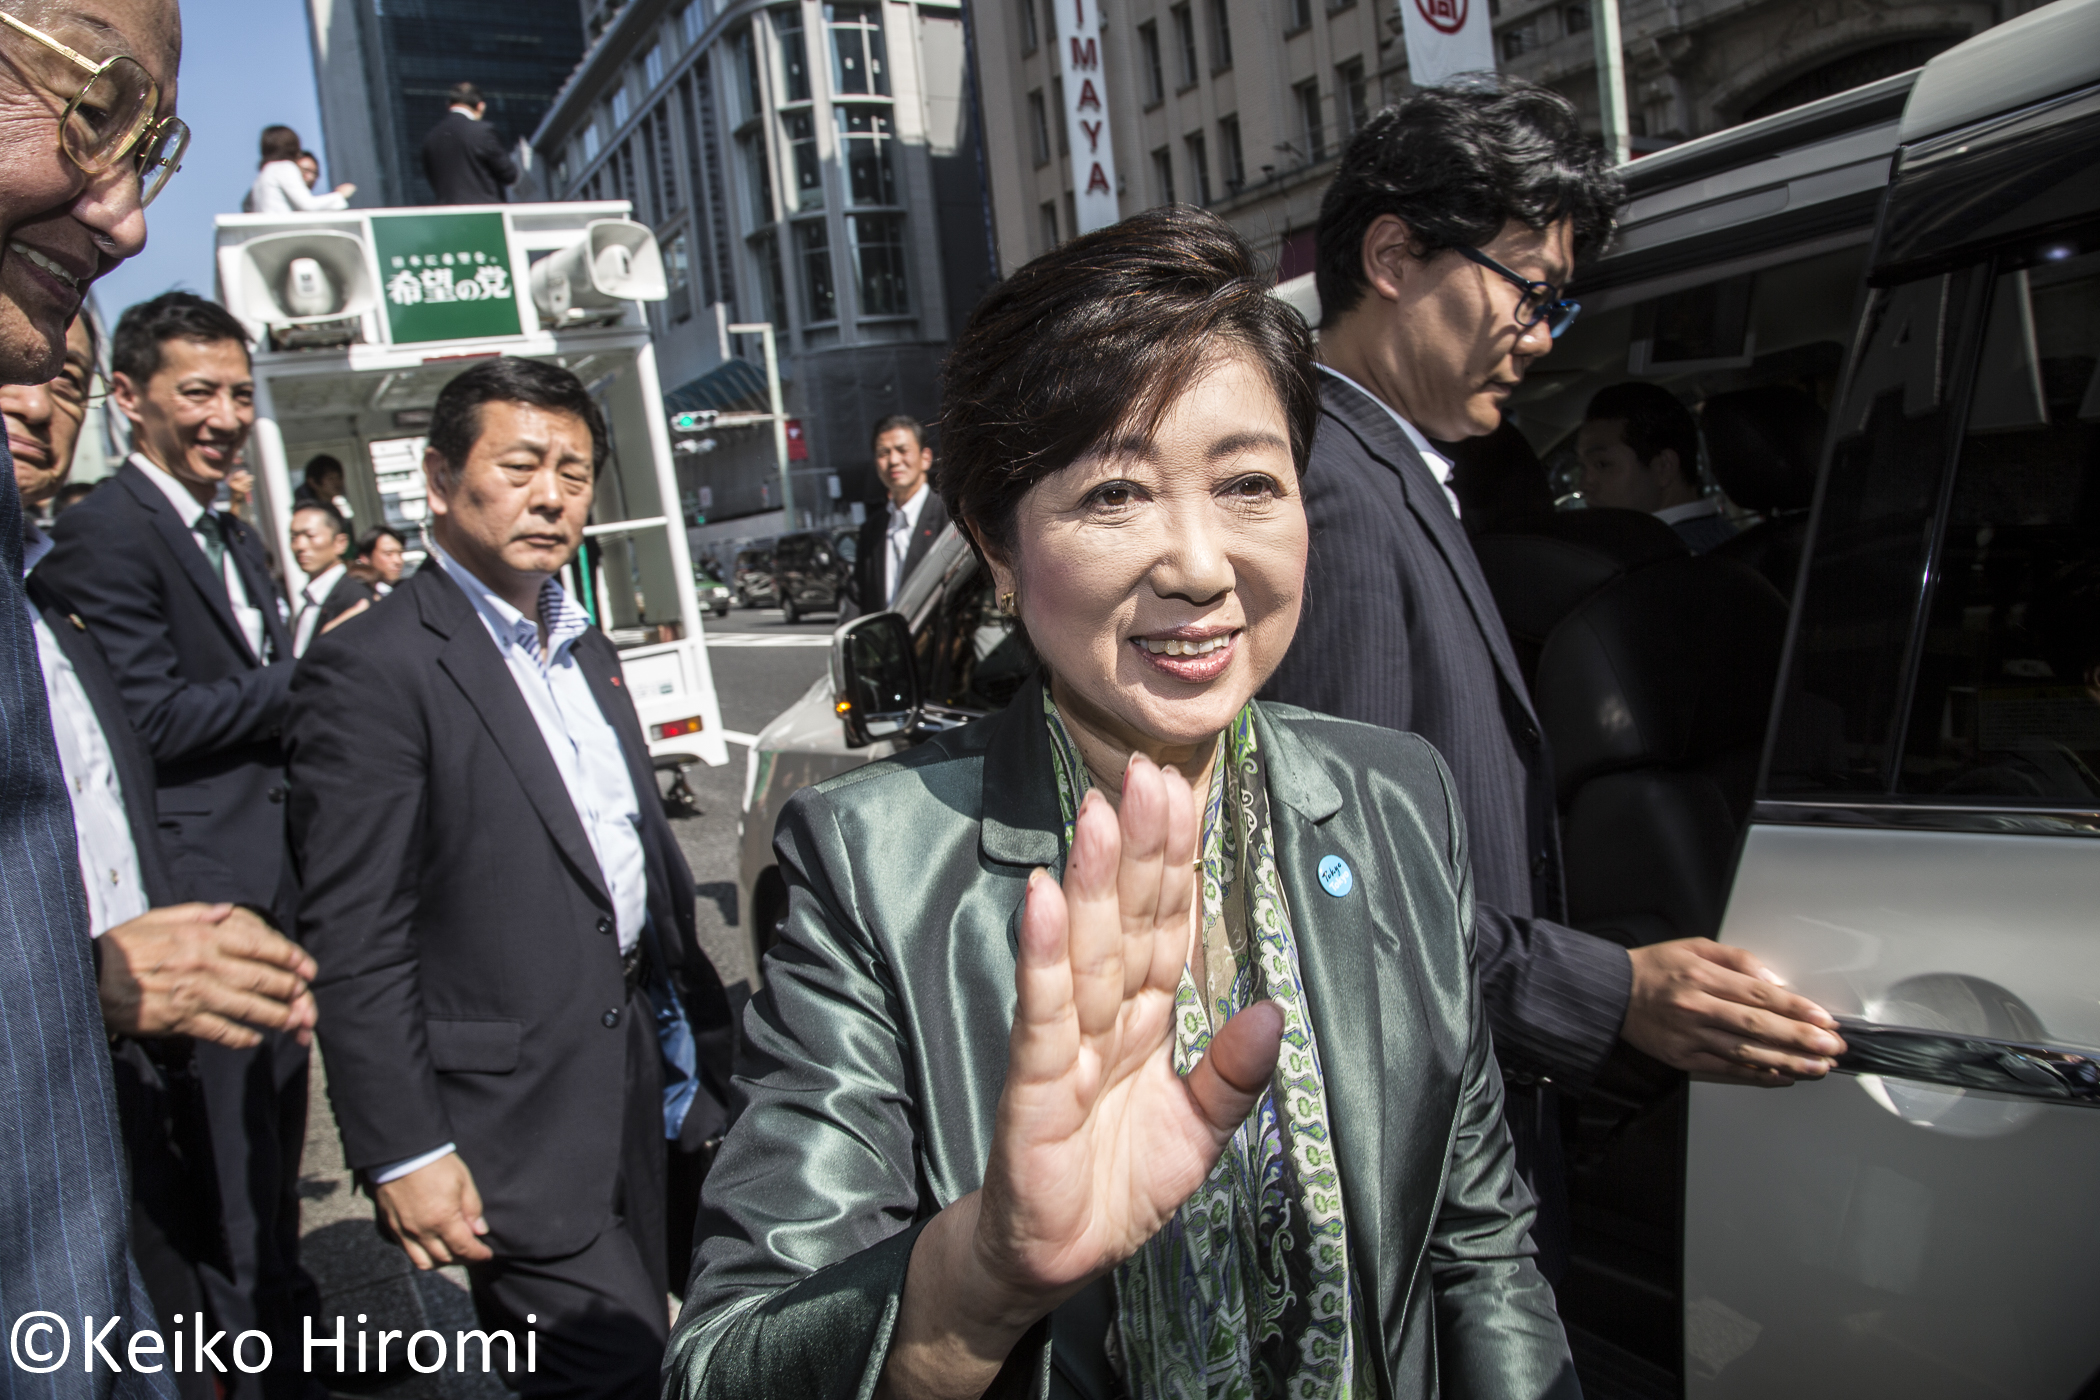  Yuriko Koike, Tokyo Governor and leader of Party of Hope, campaigning in Nihombashi, Tokyo, Japan on October 9, 2017. 